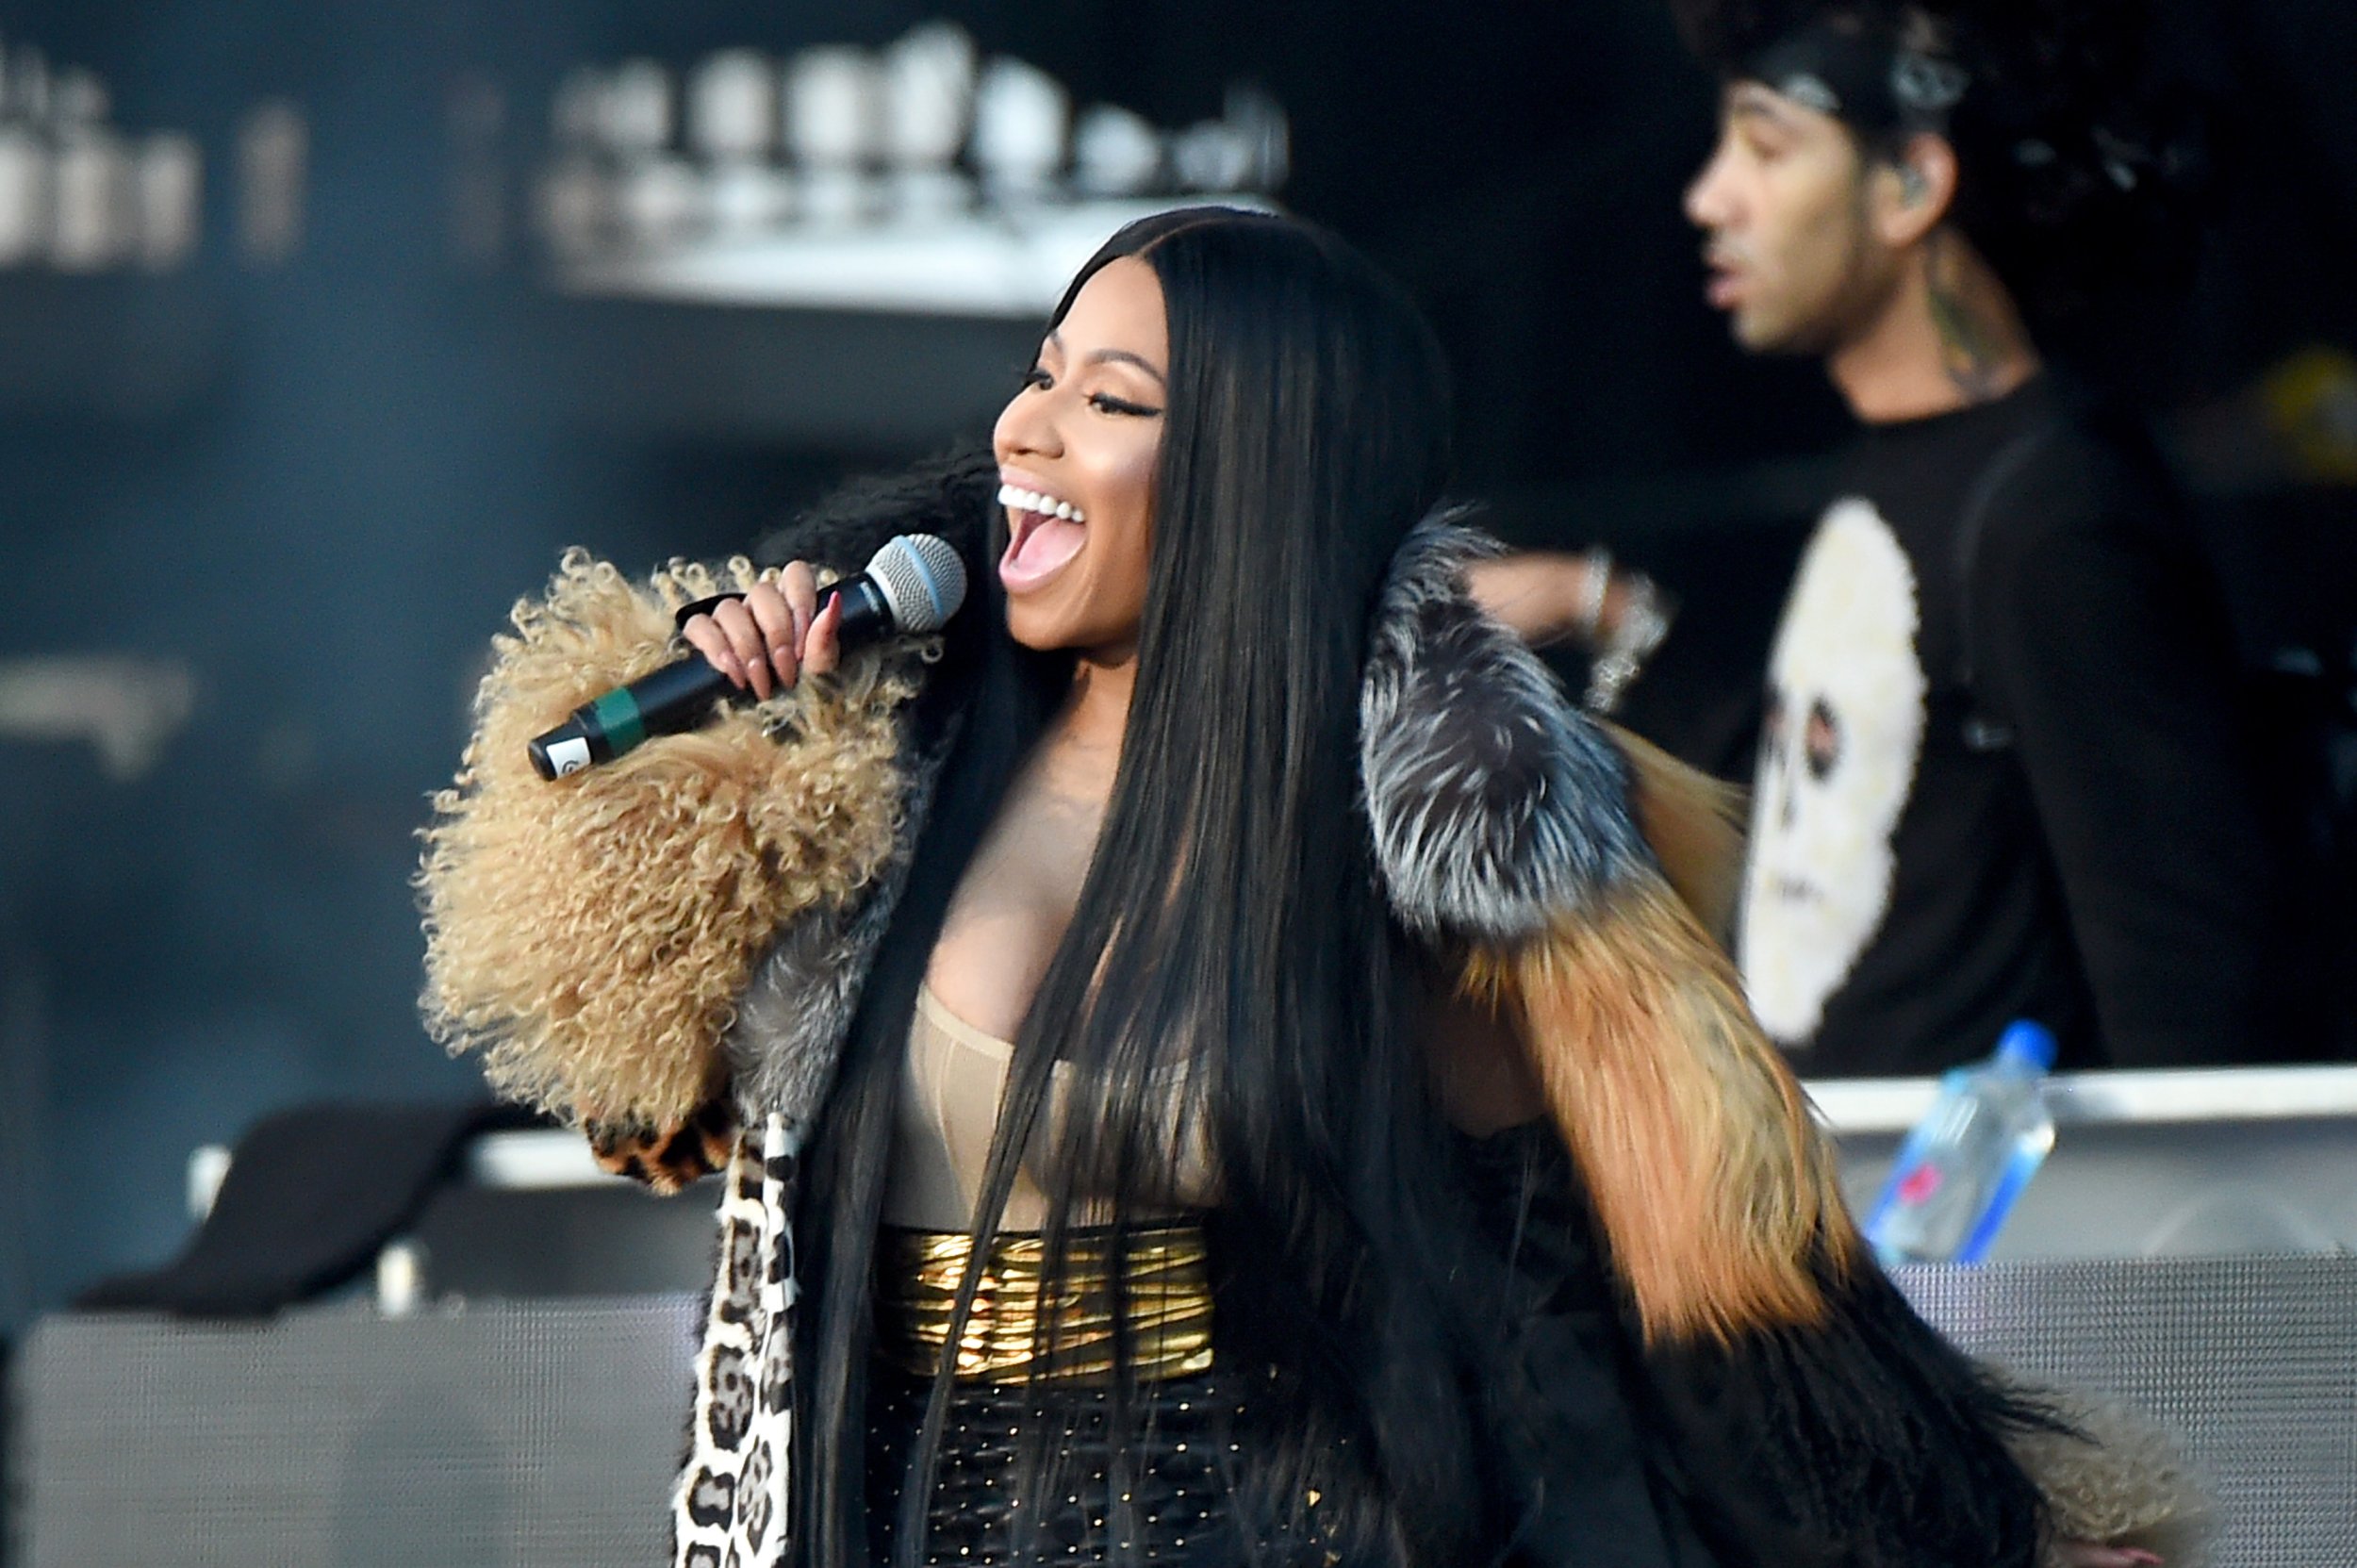 Nicki Minaj Accuses Grammys Of Moving Super Freaky Girl To Accommodate Undeserving Artists